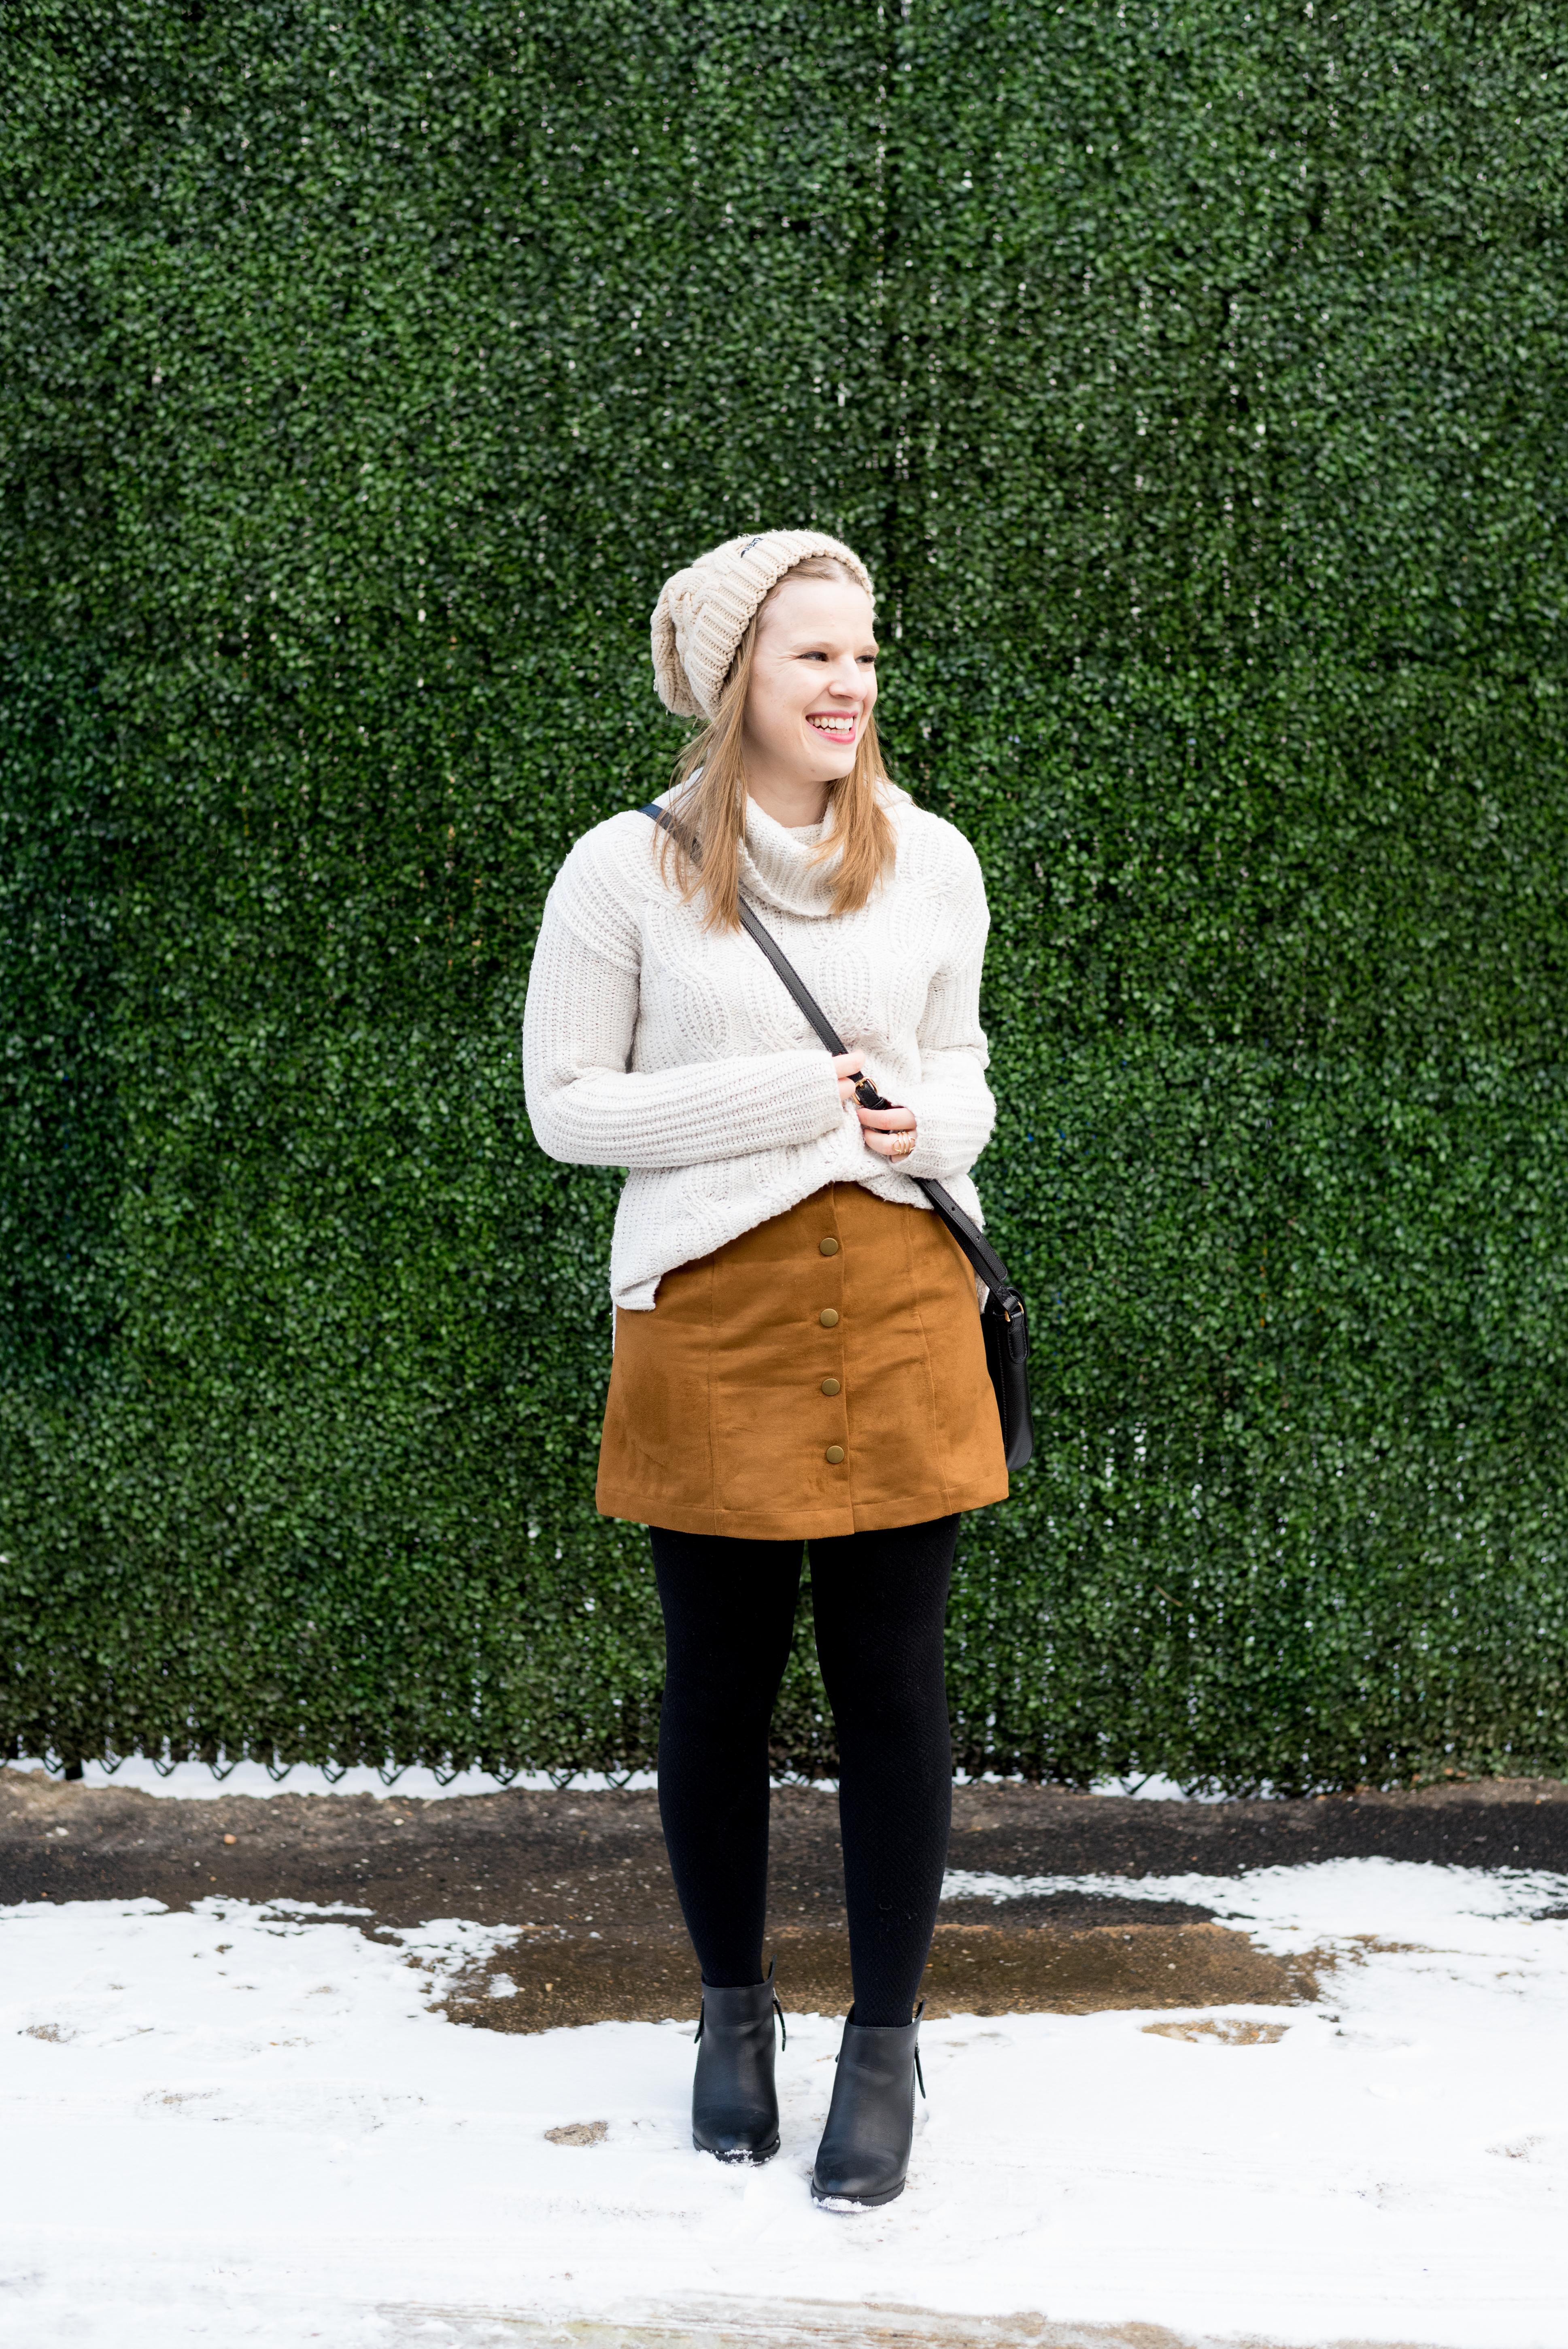 How to Style White Sweaters for Winter with Old Navy Suede Skirt, leggings, and boots